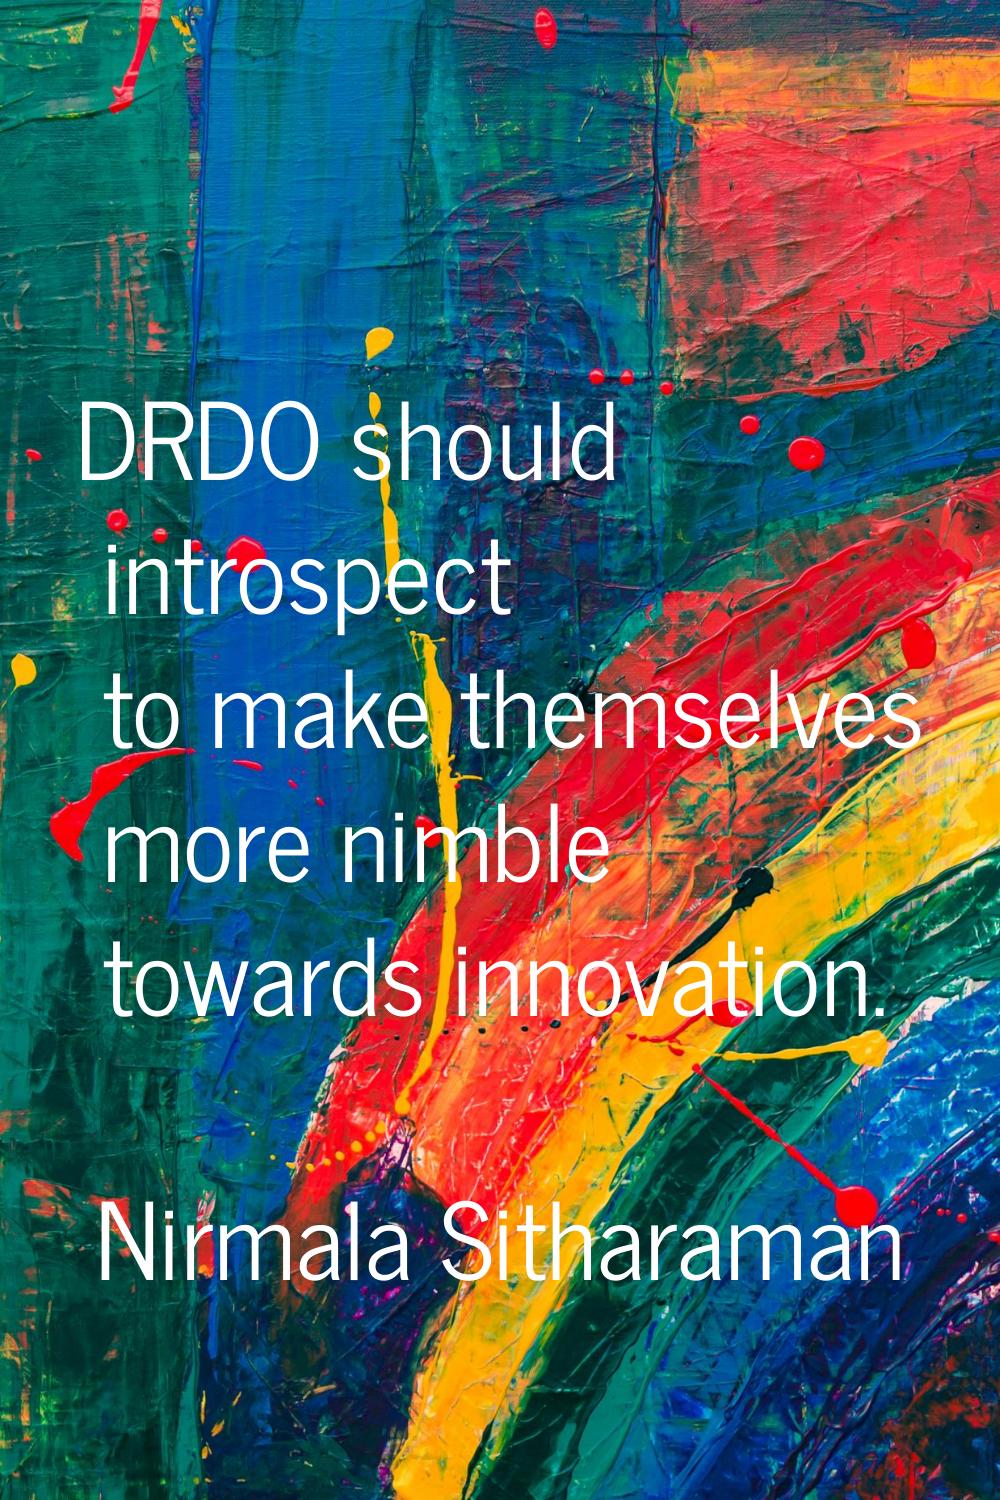 DRDO should introspect to make themselves more nimble towards innovation.